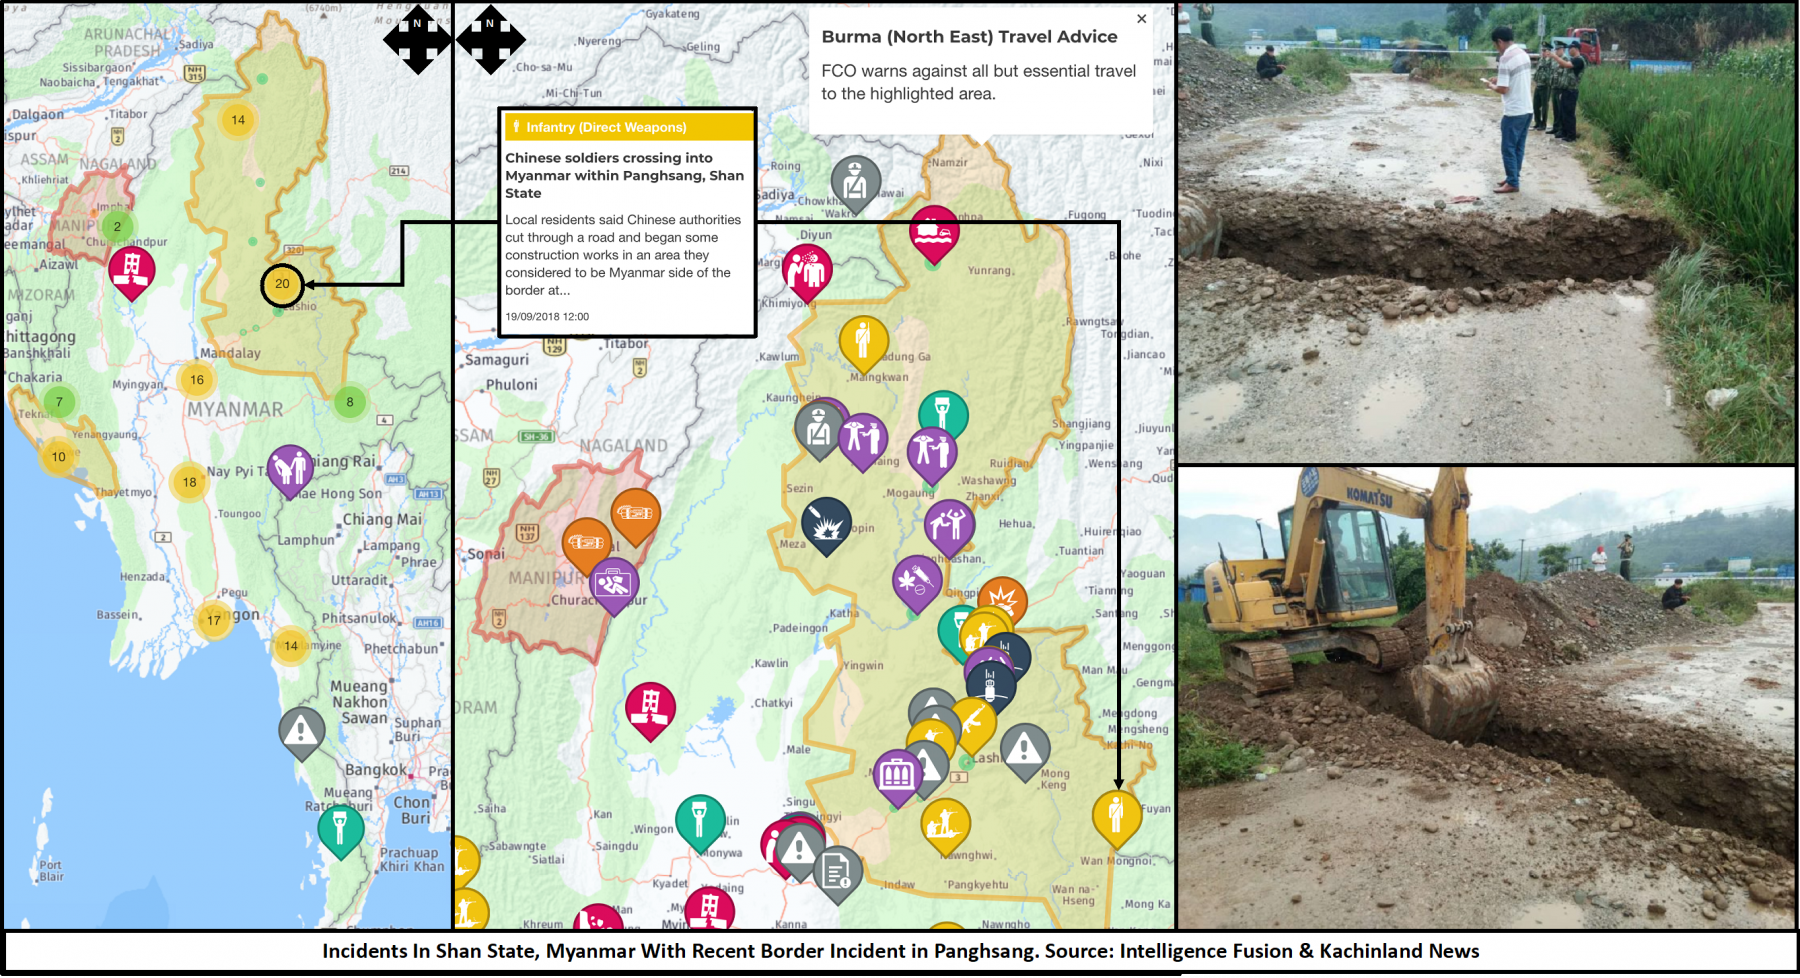 A map showing the incidents across Shan State and a With Recent Border Incident in Panghsang, Myanmar